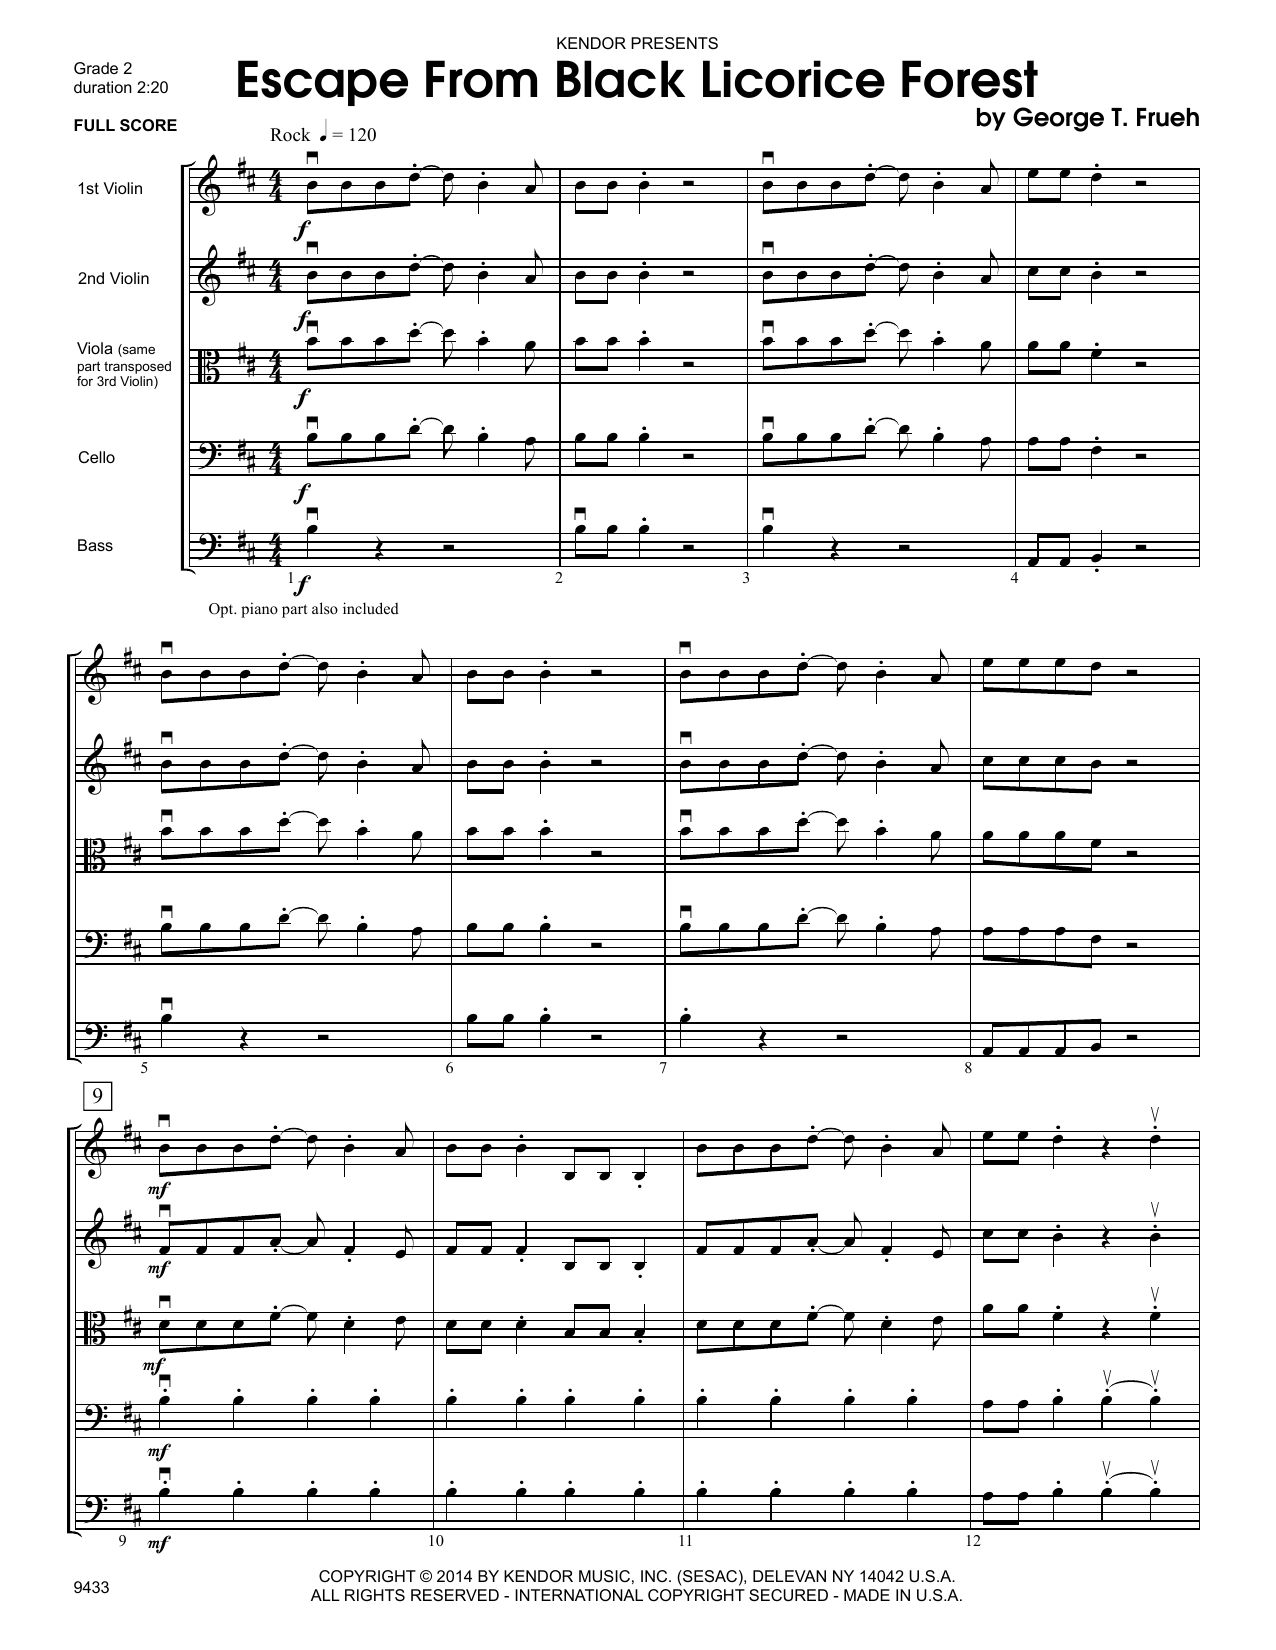 Escape From Black Licorice Forest - Full Score sheet music